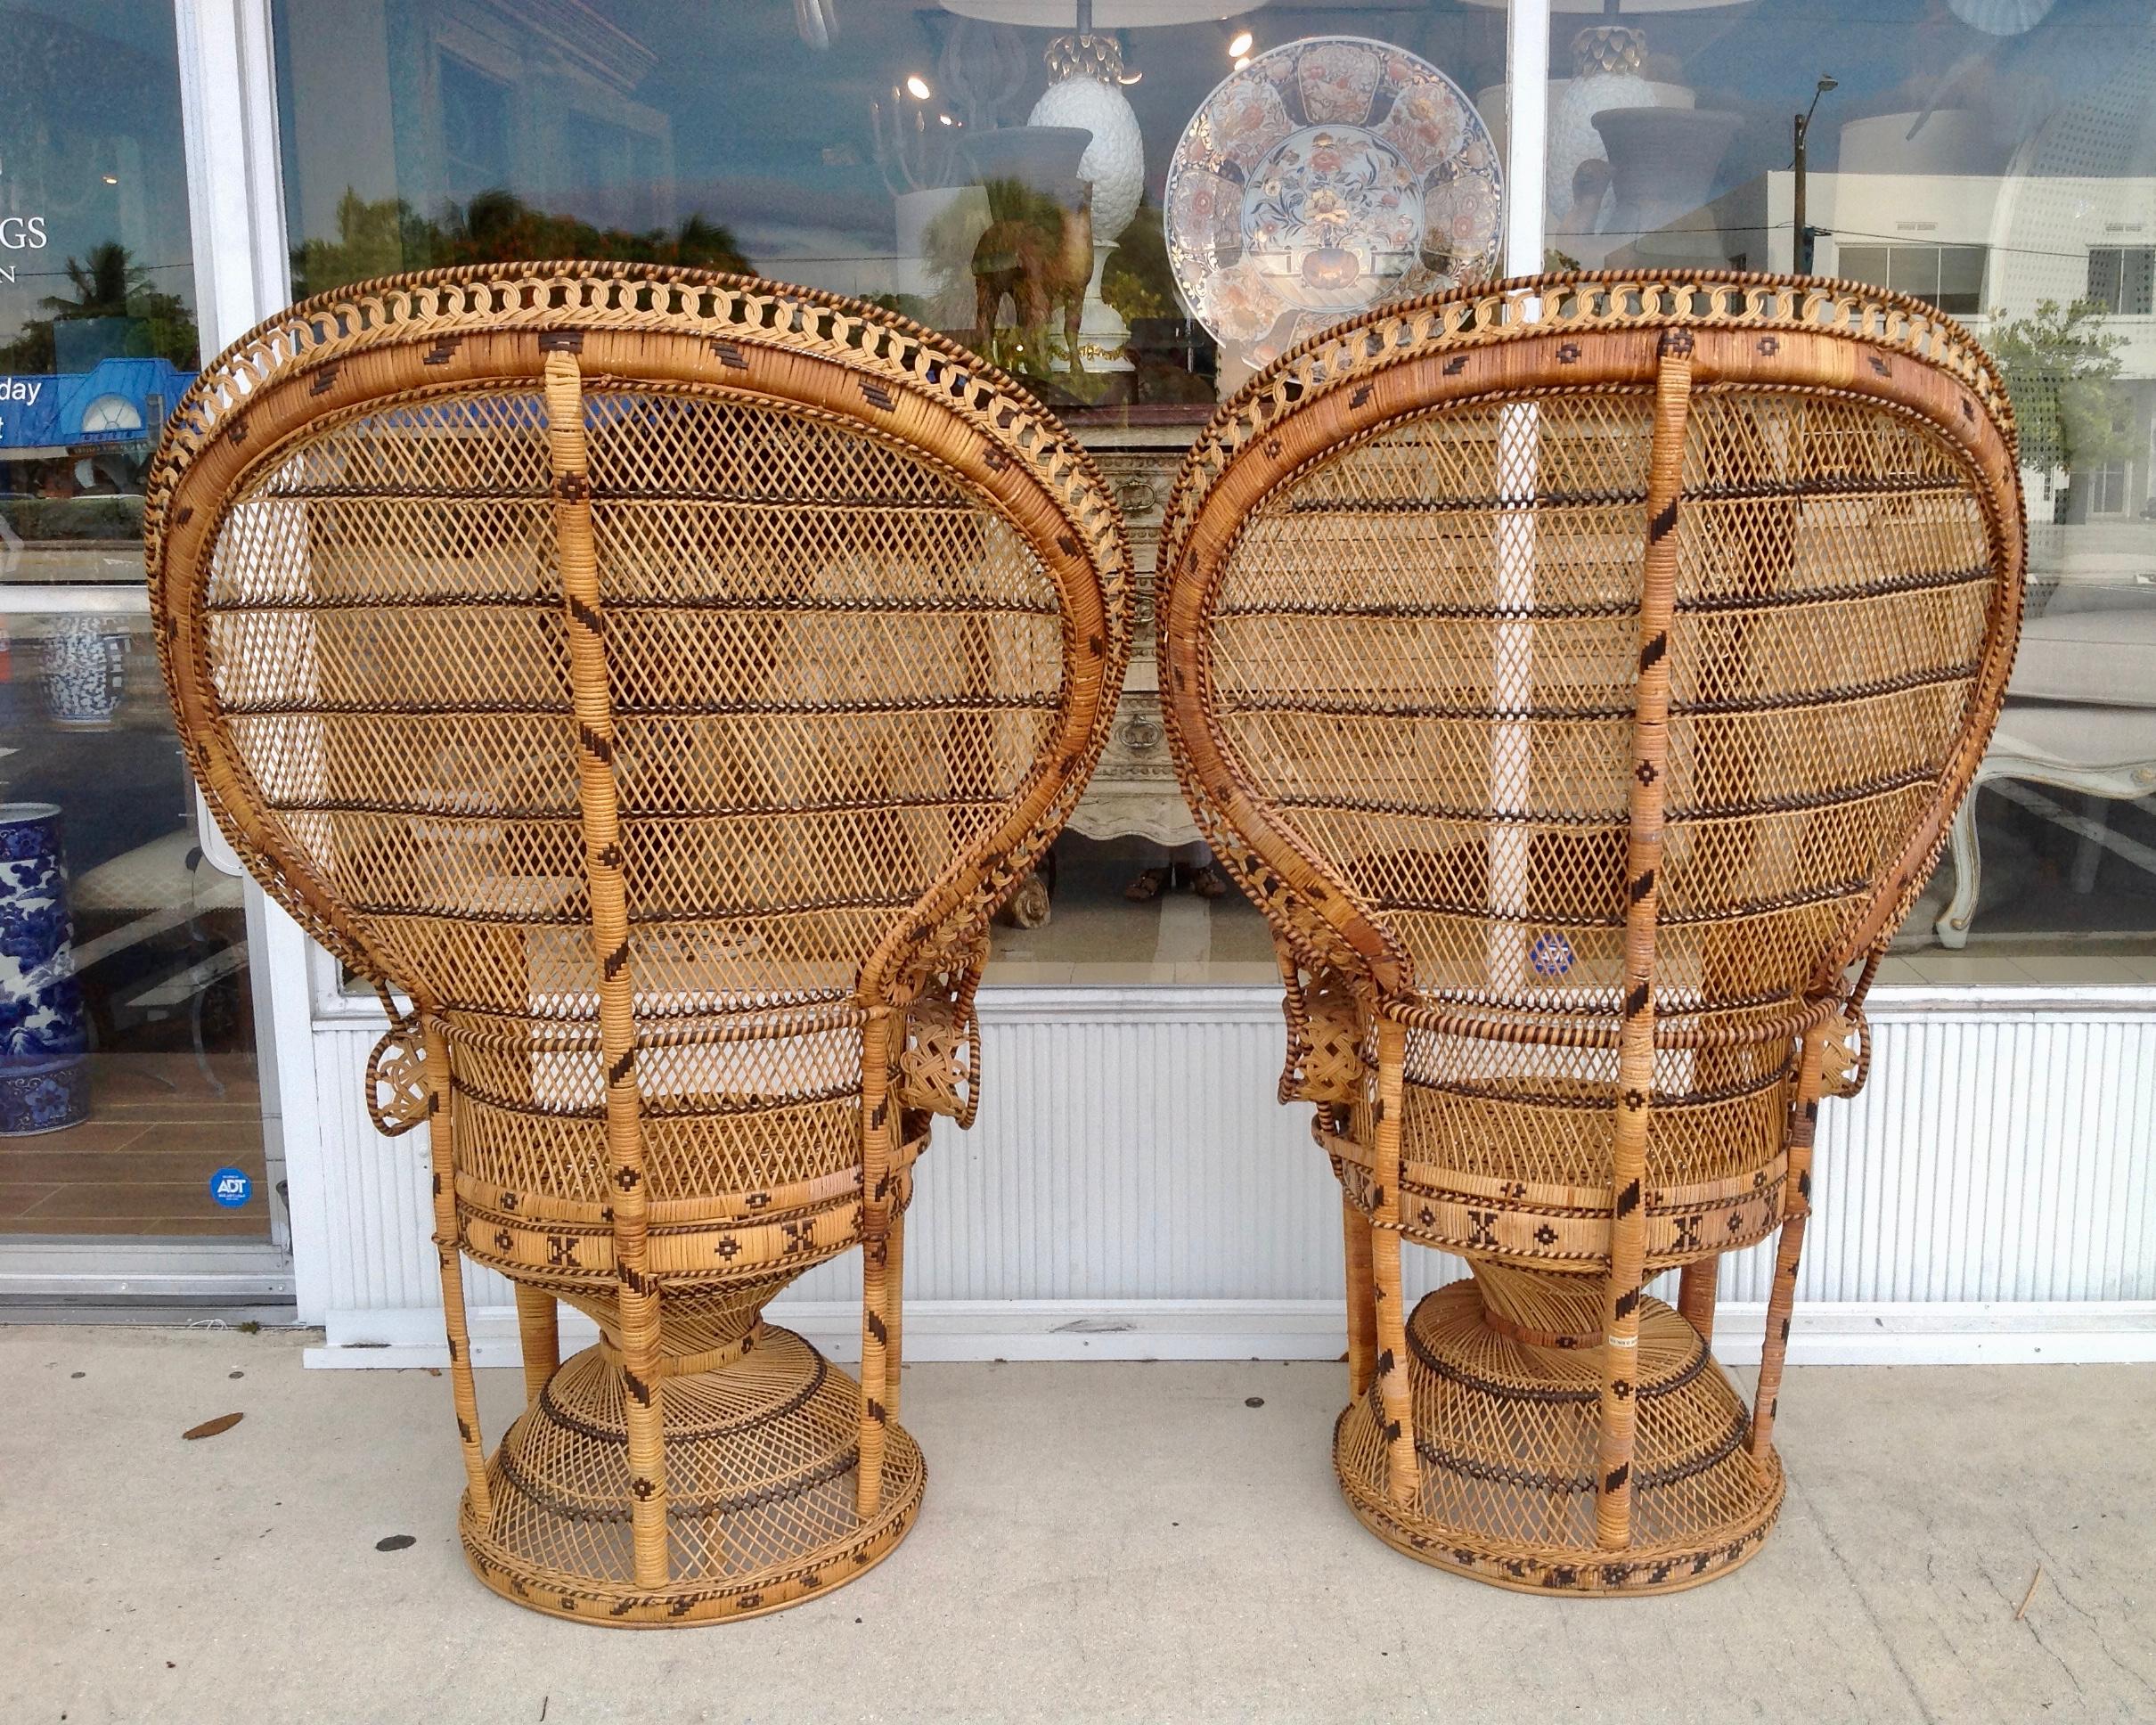 Pair of Decorated Woven Rattan Peacock Chairs 1